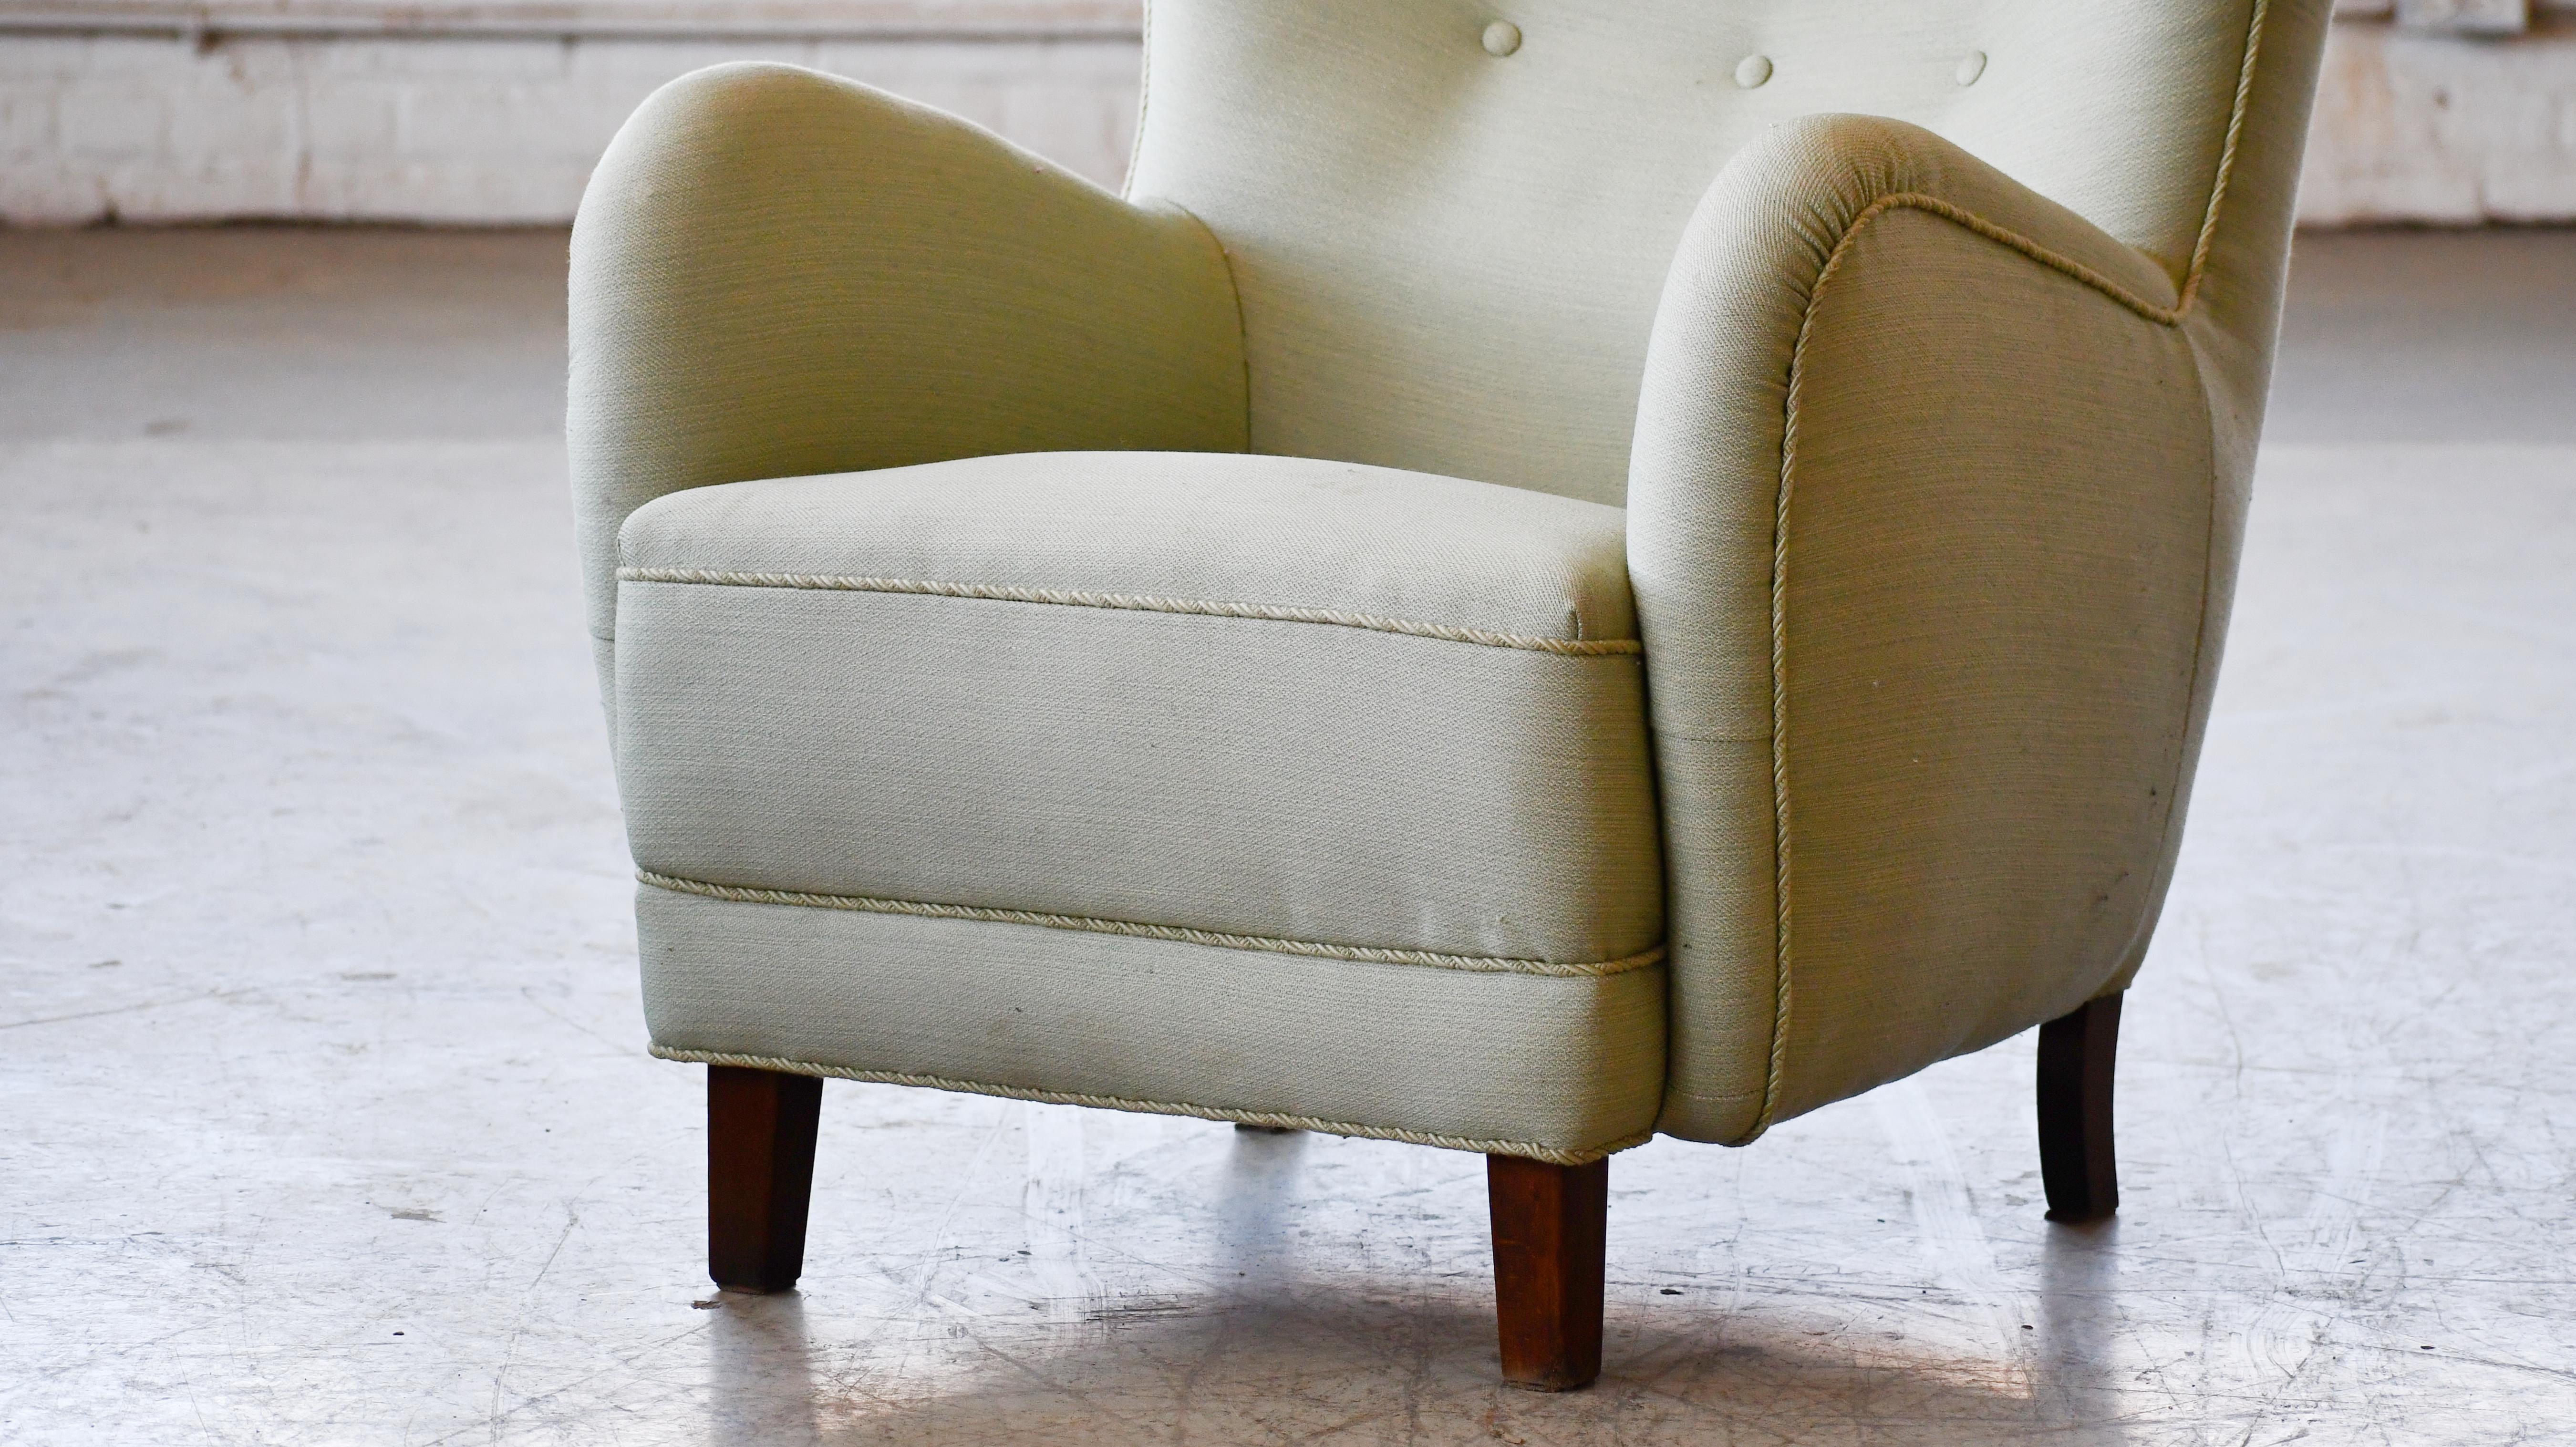 Mid-20th Century High Back Lounge Chair Attributed to Flemming Lassen Denmark 1940's For Sale